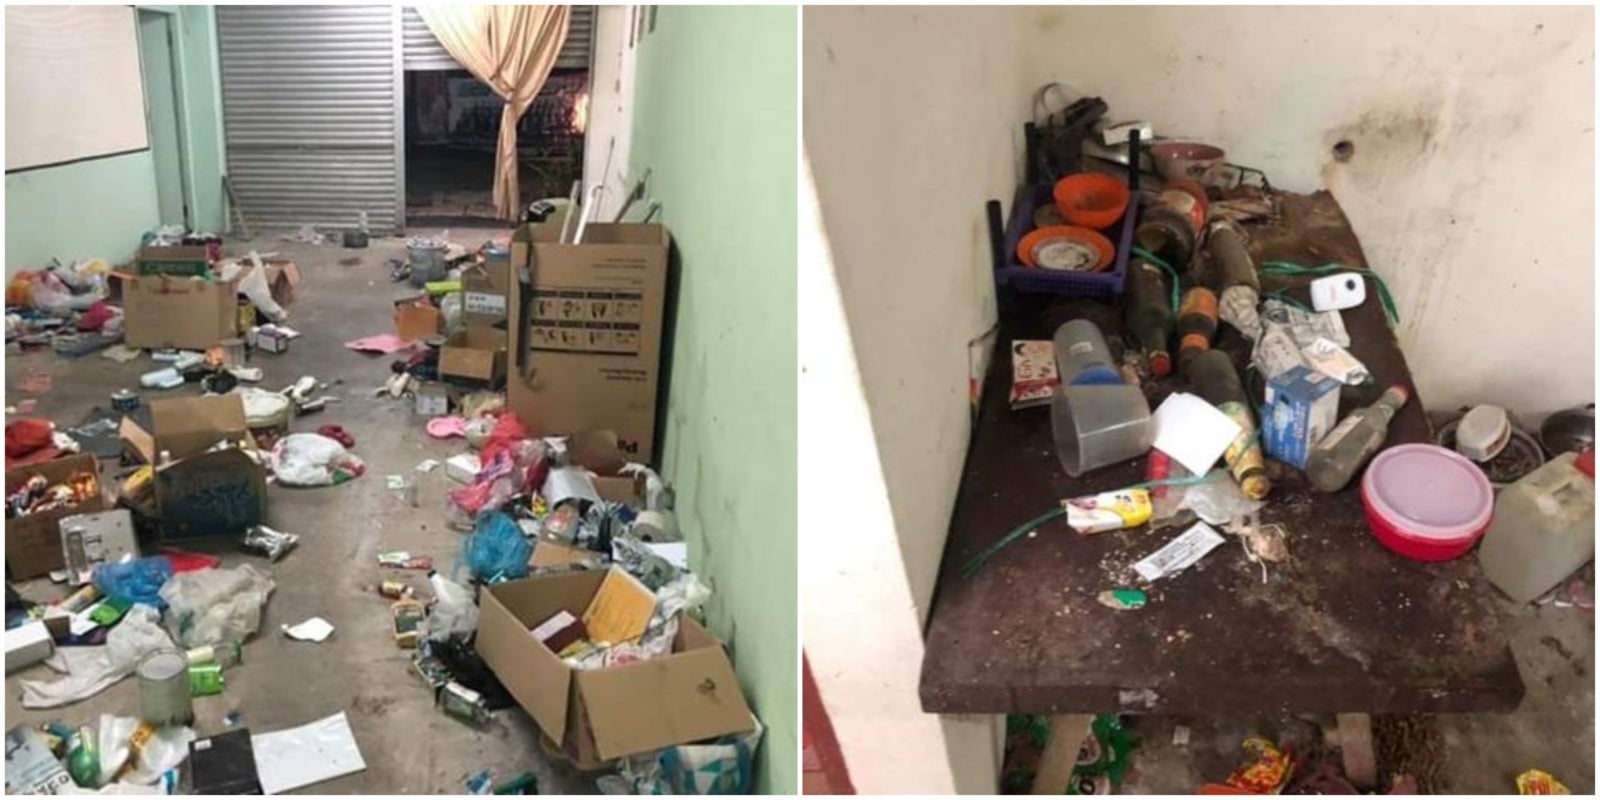 Miri School Teacher Leaves Behind Shocking Piles Of Rubbish Everywhere In Rented Terrace House - World Of Buzz